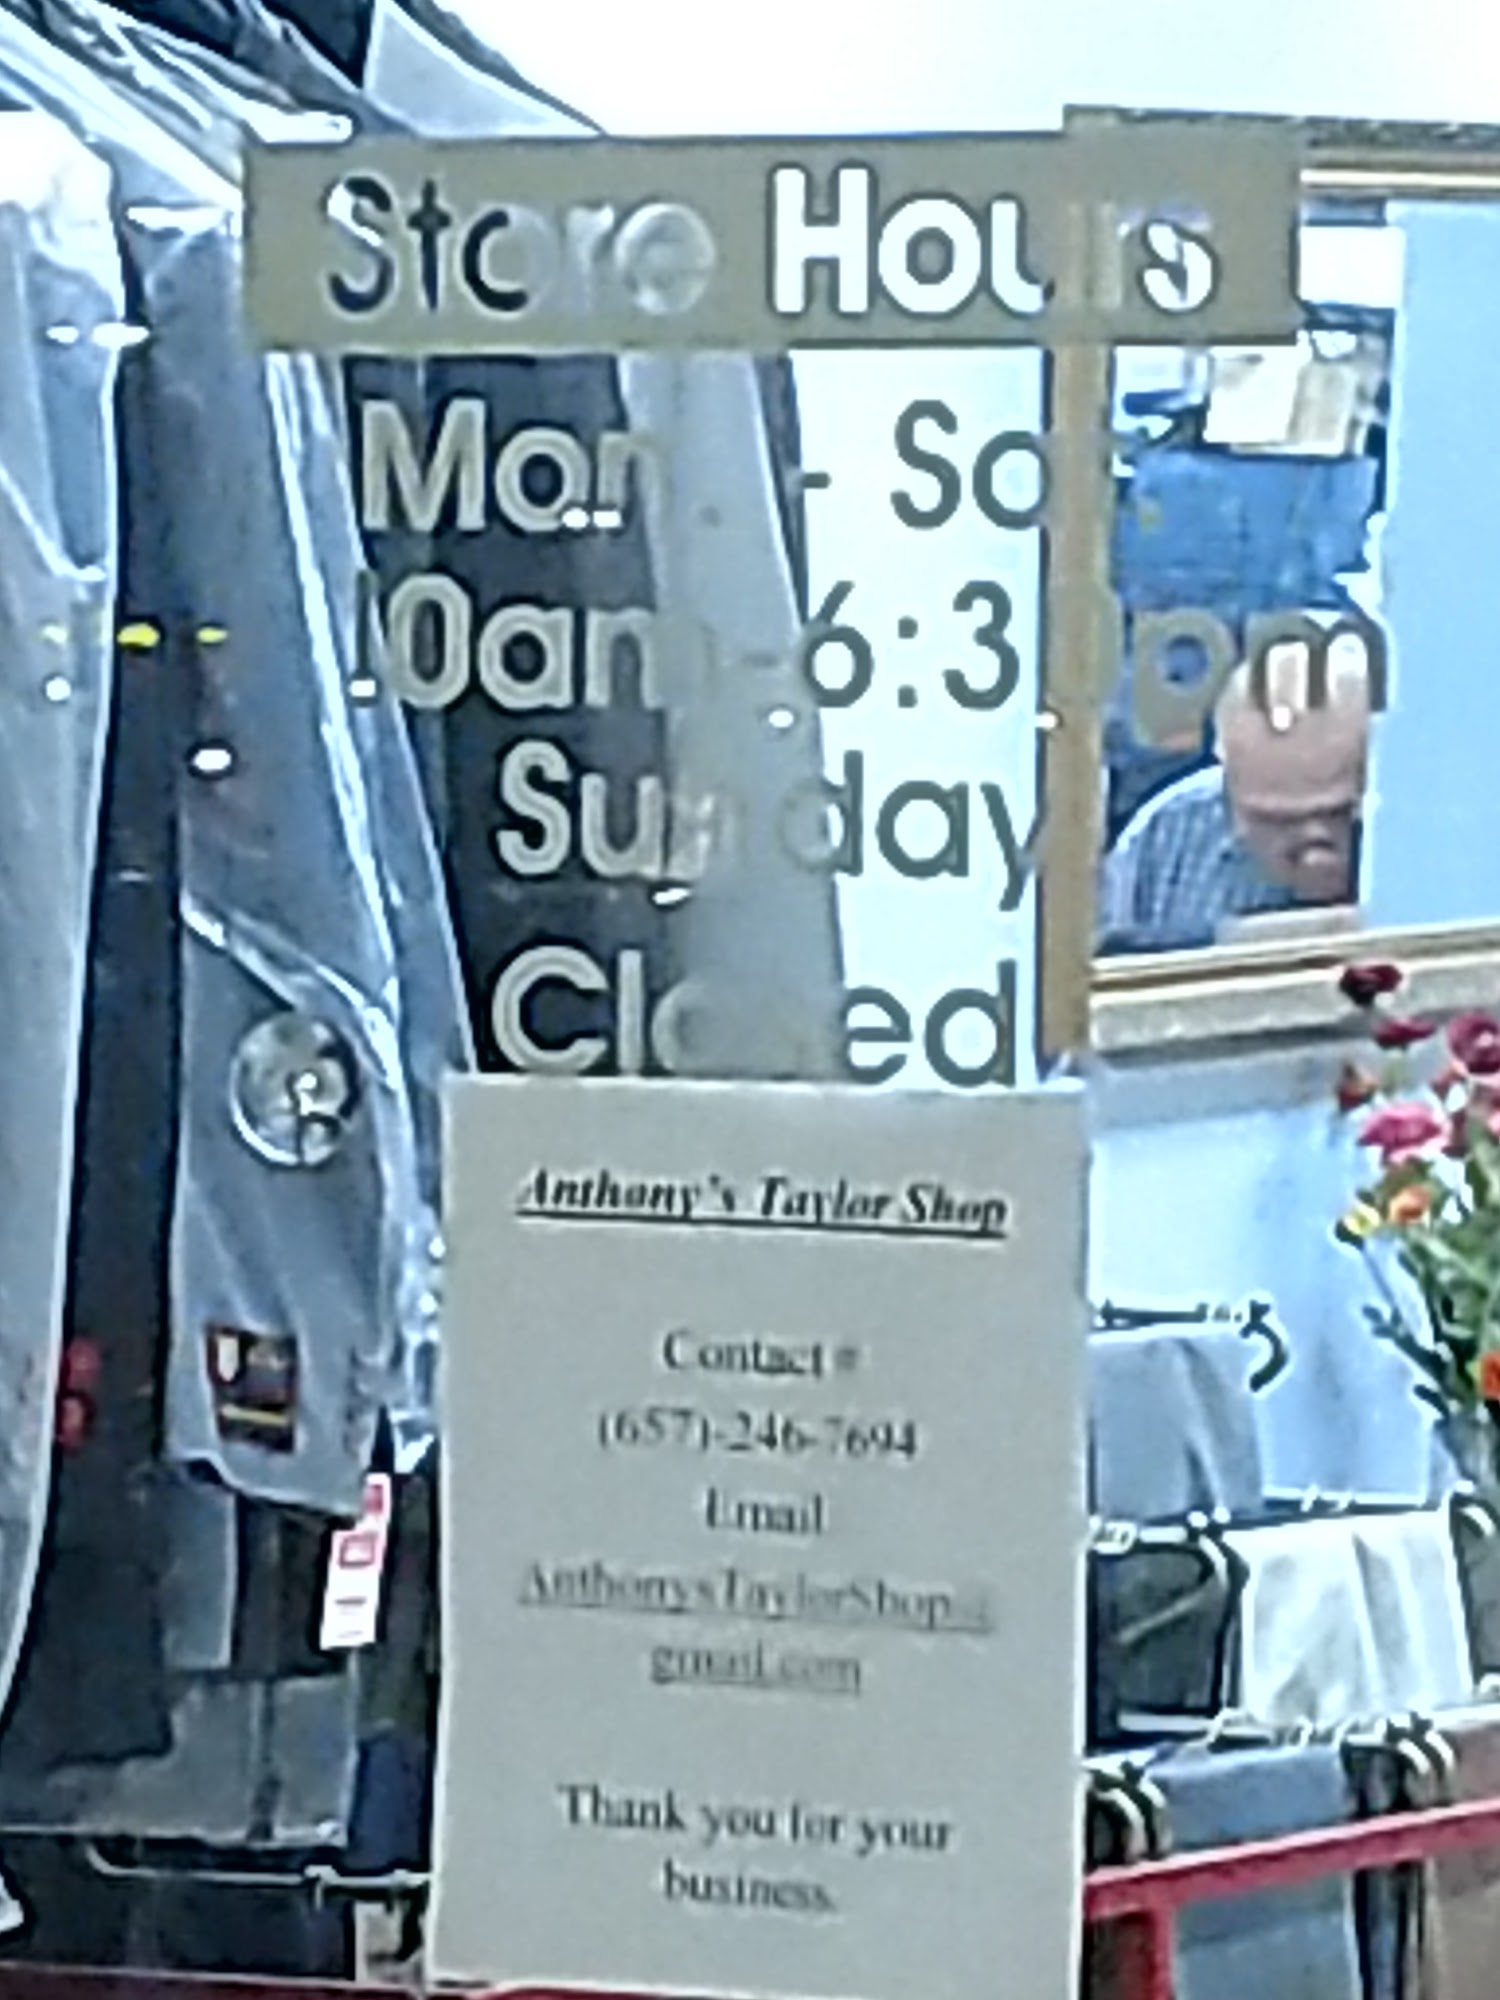 Anthony's Tailor Shop 26761 Portola Pkwy APT 2D, Foothill Ranch California 92610